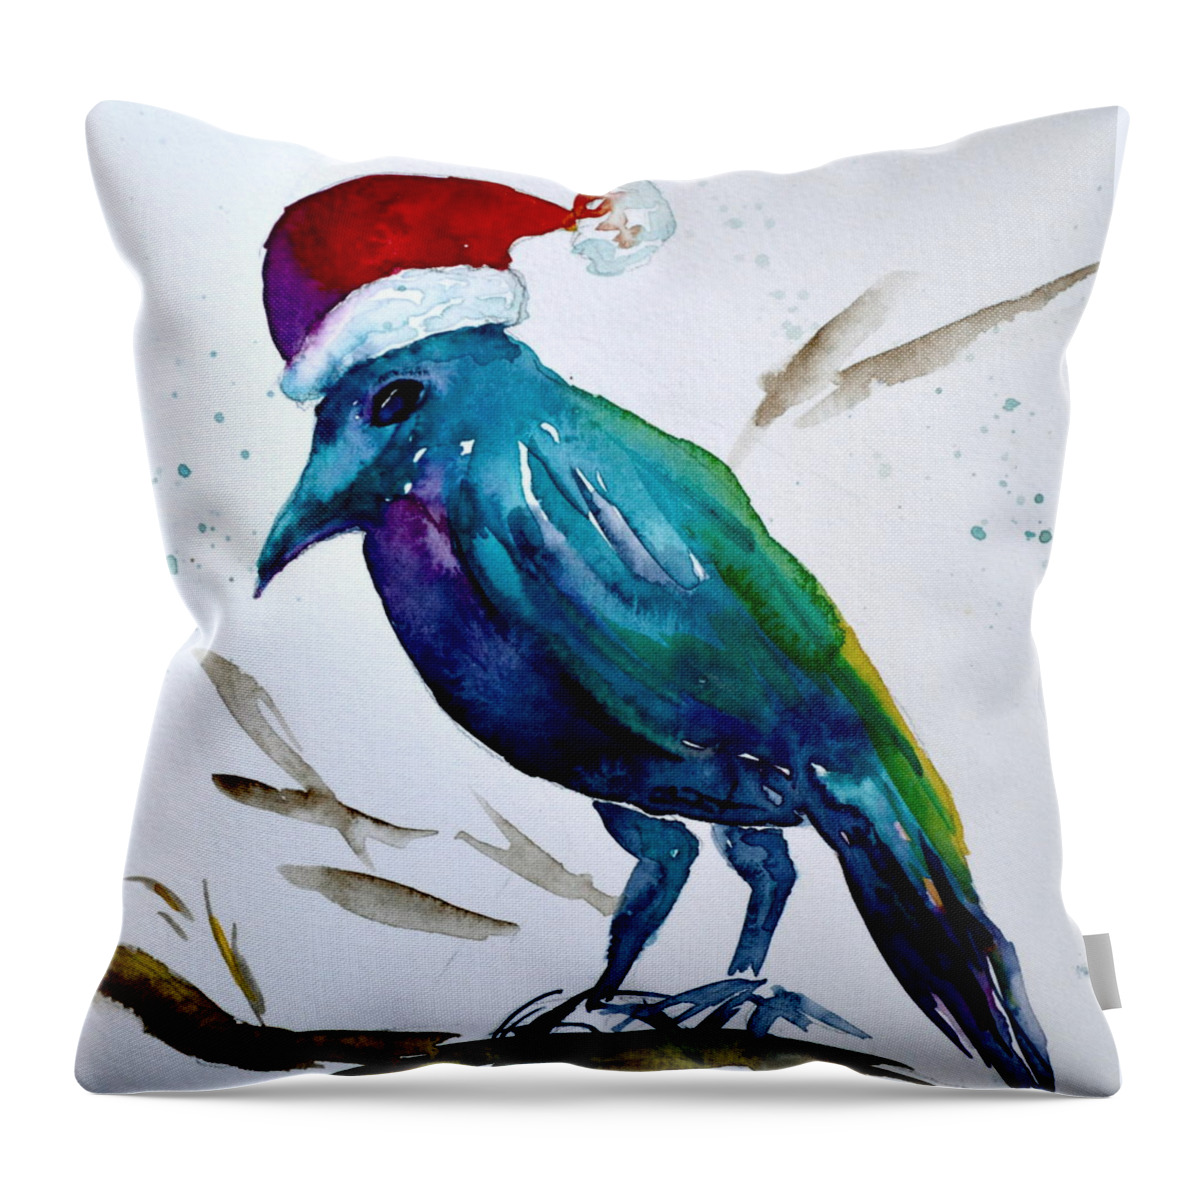 Crow Ho Ho Throw Pillow featuring the painting Crow Ho Ho by Beverley Harper Tinsley